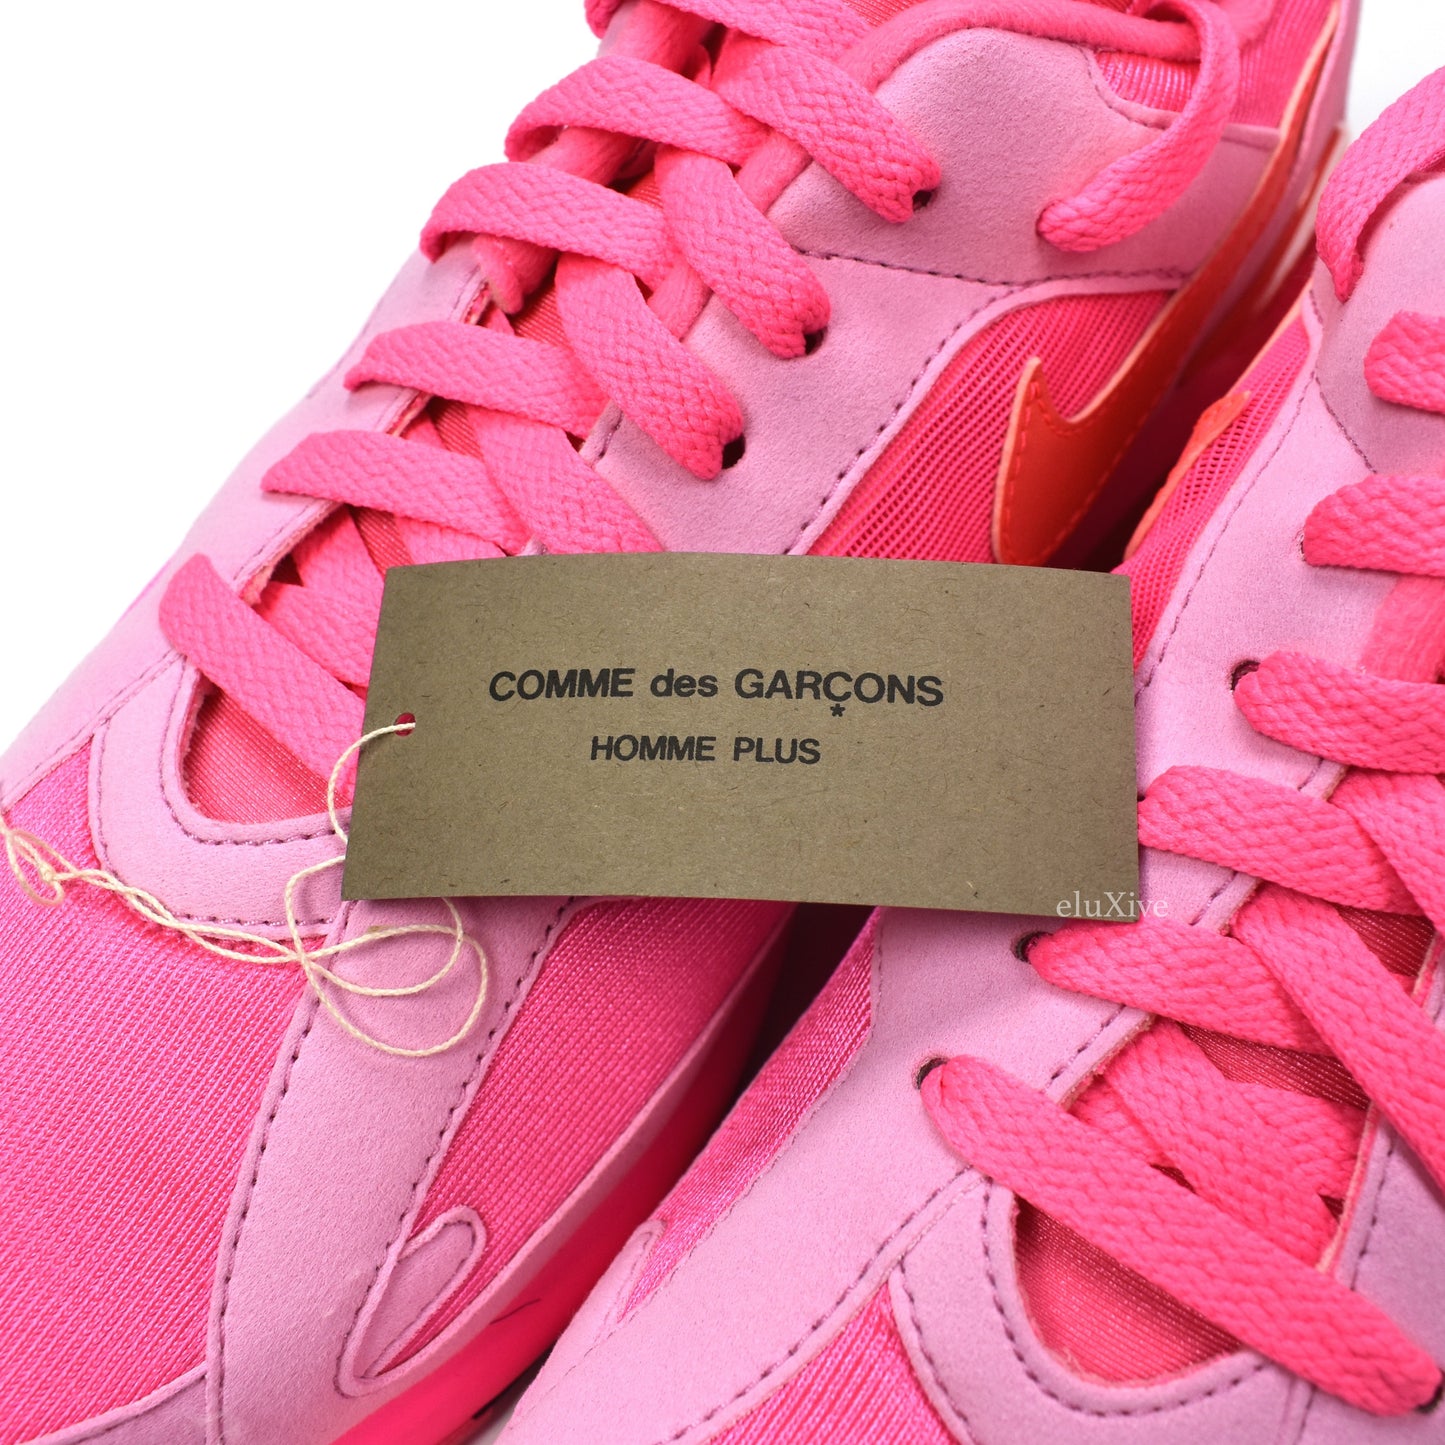 Comme des Garcons x Nike - Air Max 180 CDG (Pink)